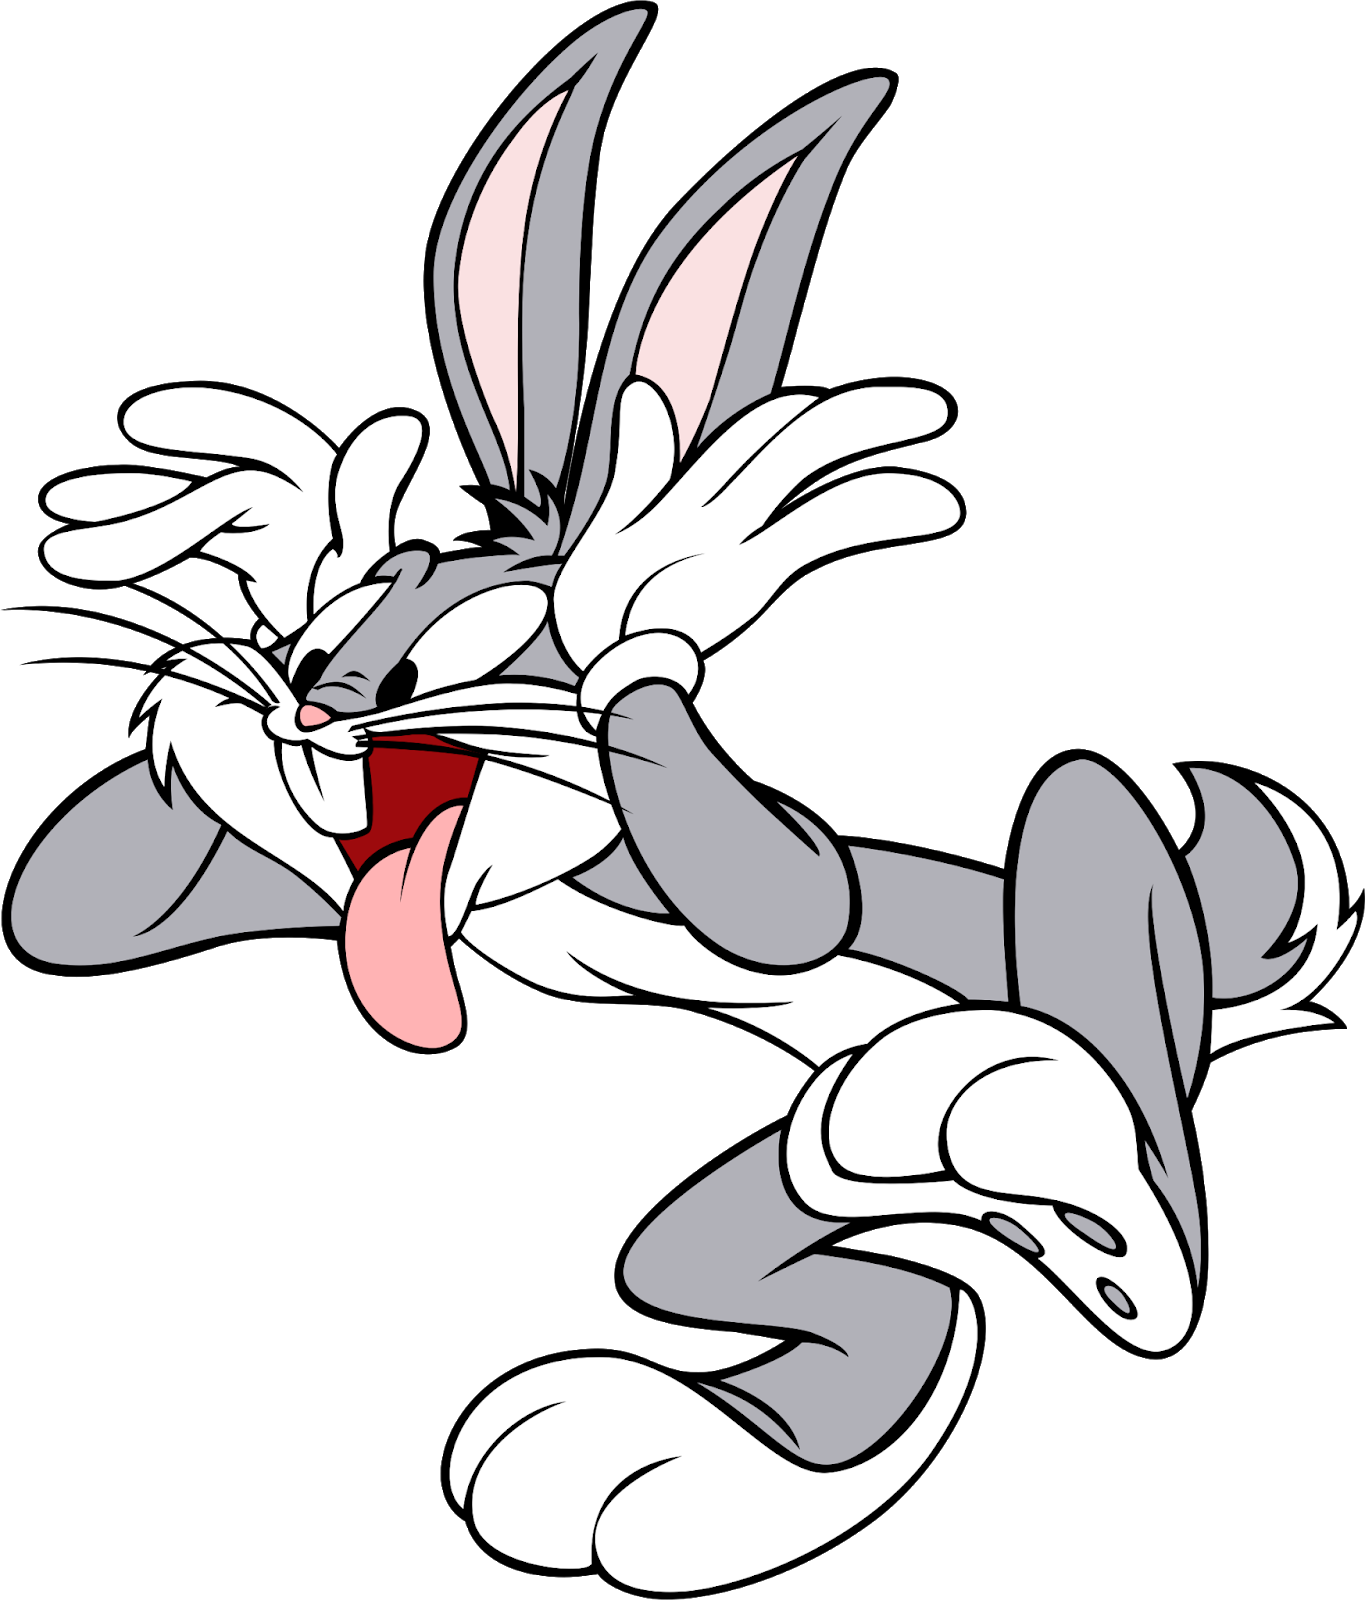 Download Bugs Bunny Characters, Bugs Bunny Cartoon Characters, - Bugs Bunny  Dessin Animé PNG Image with No Background 